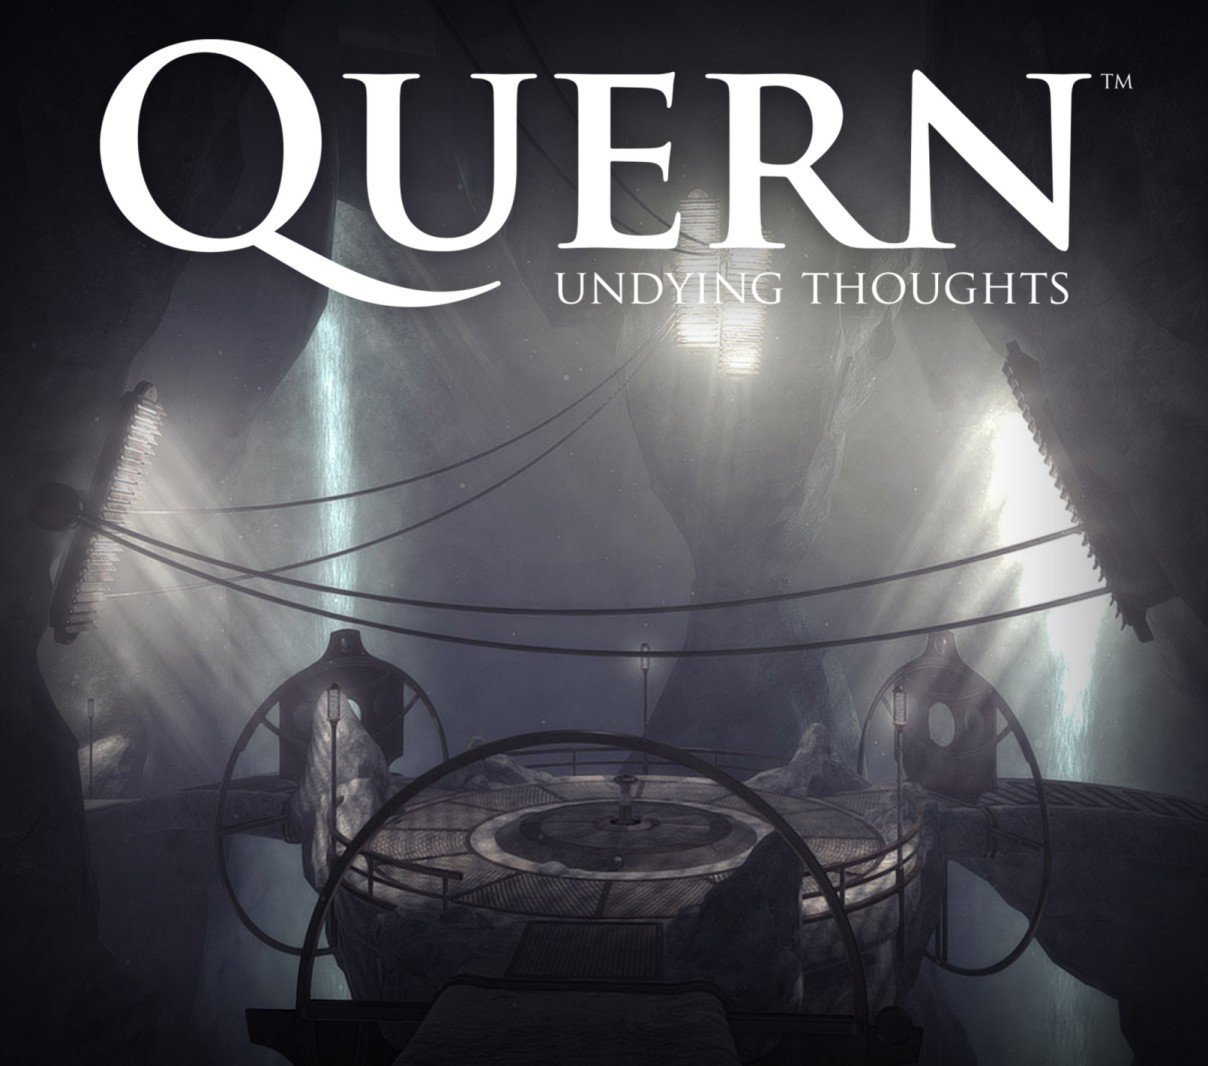 download quern pc